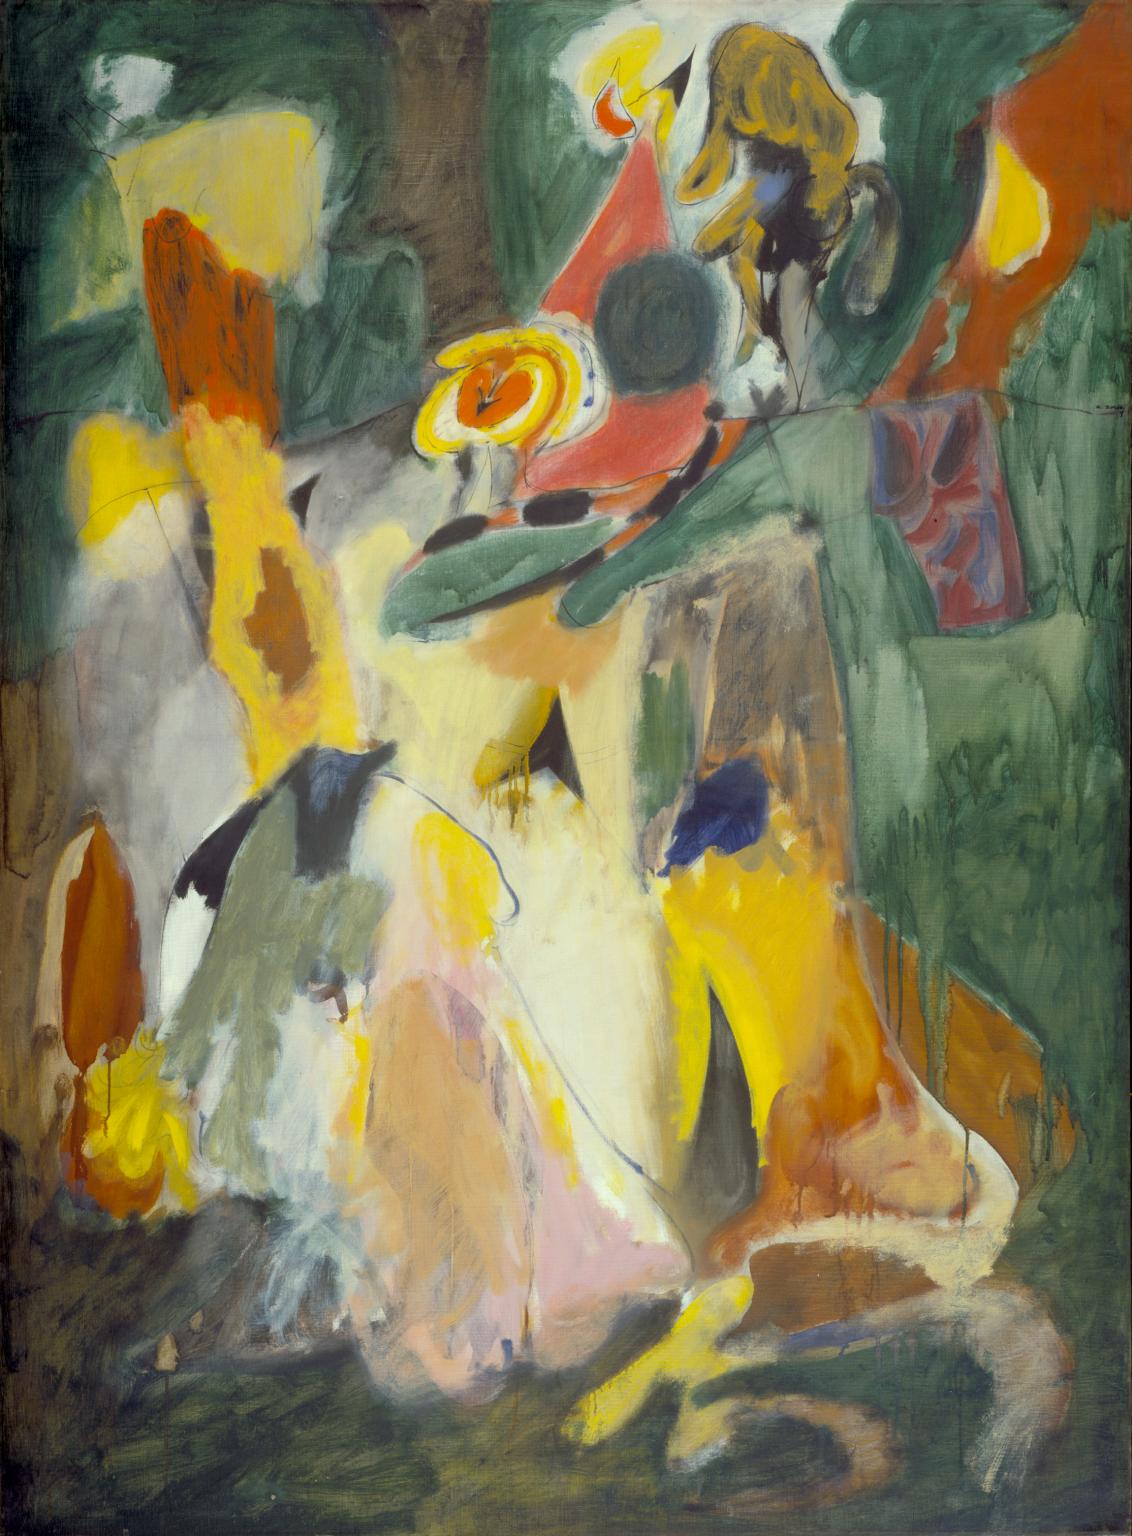 Waterfall 1943 by Arshile Gorky c.1904-1948